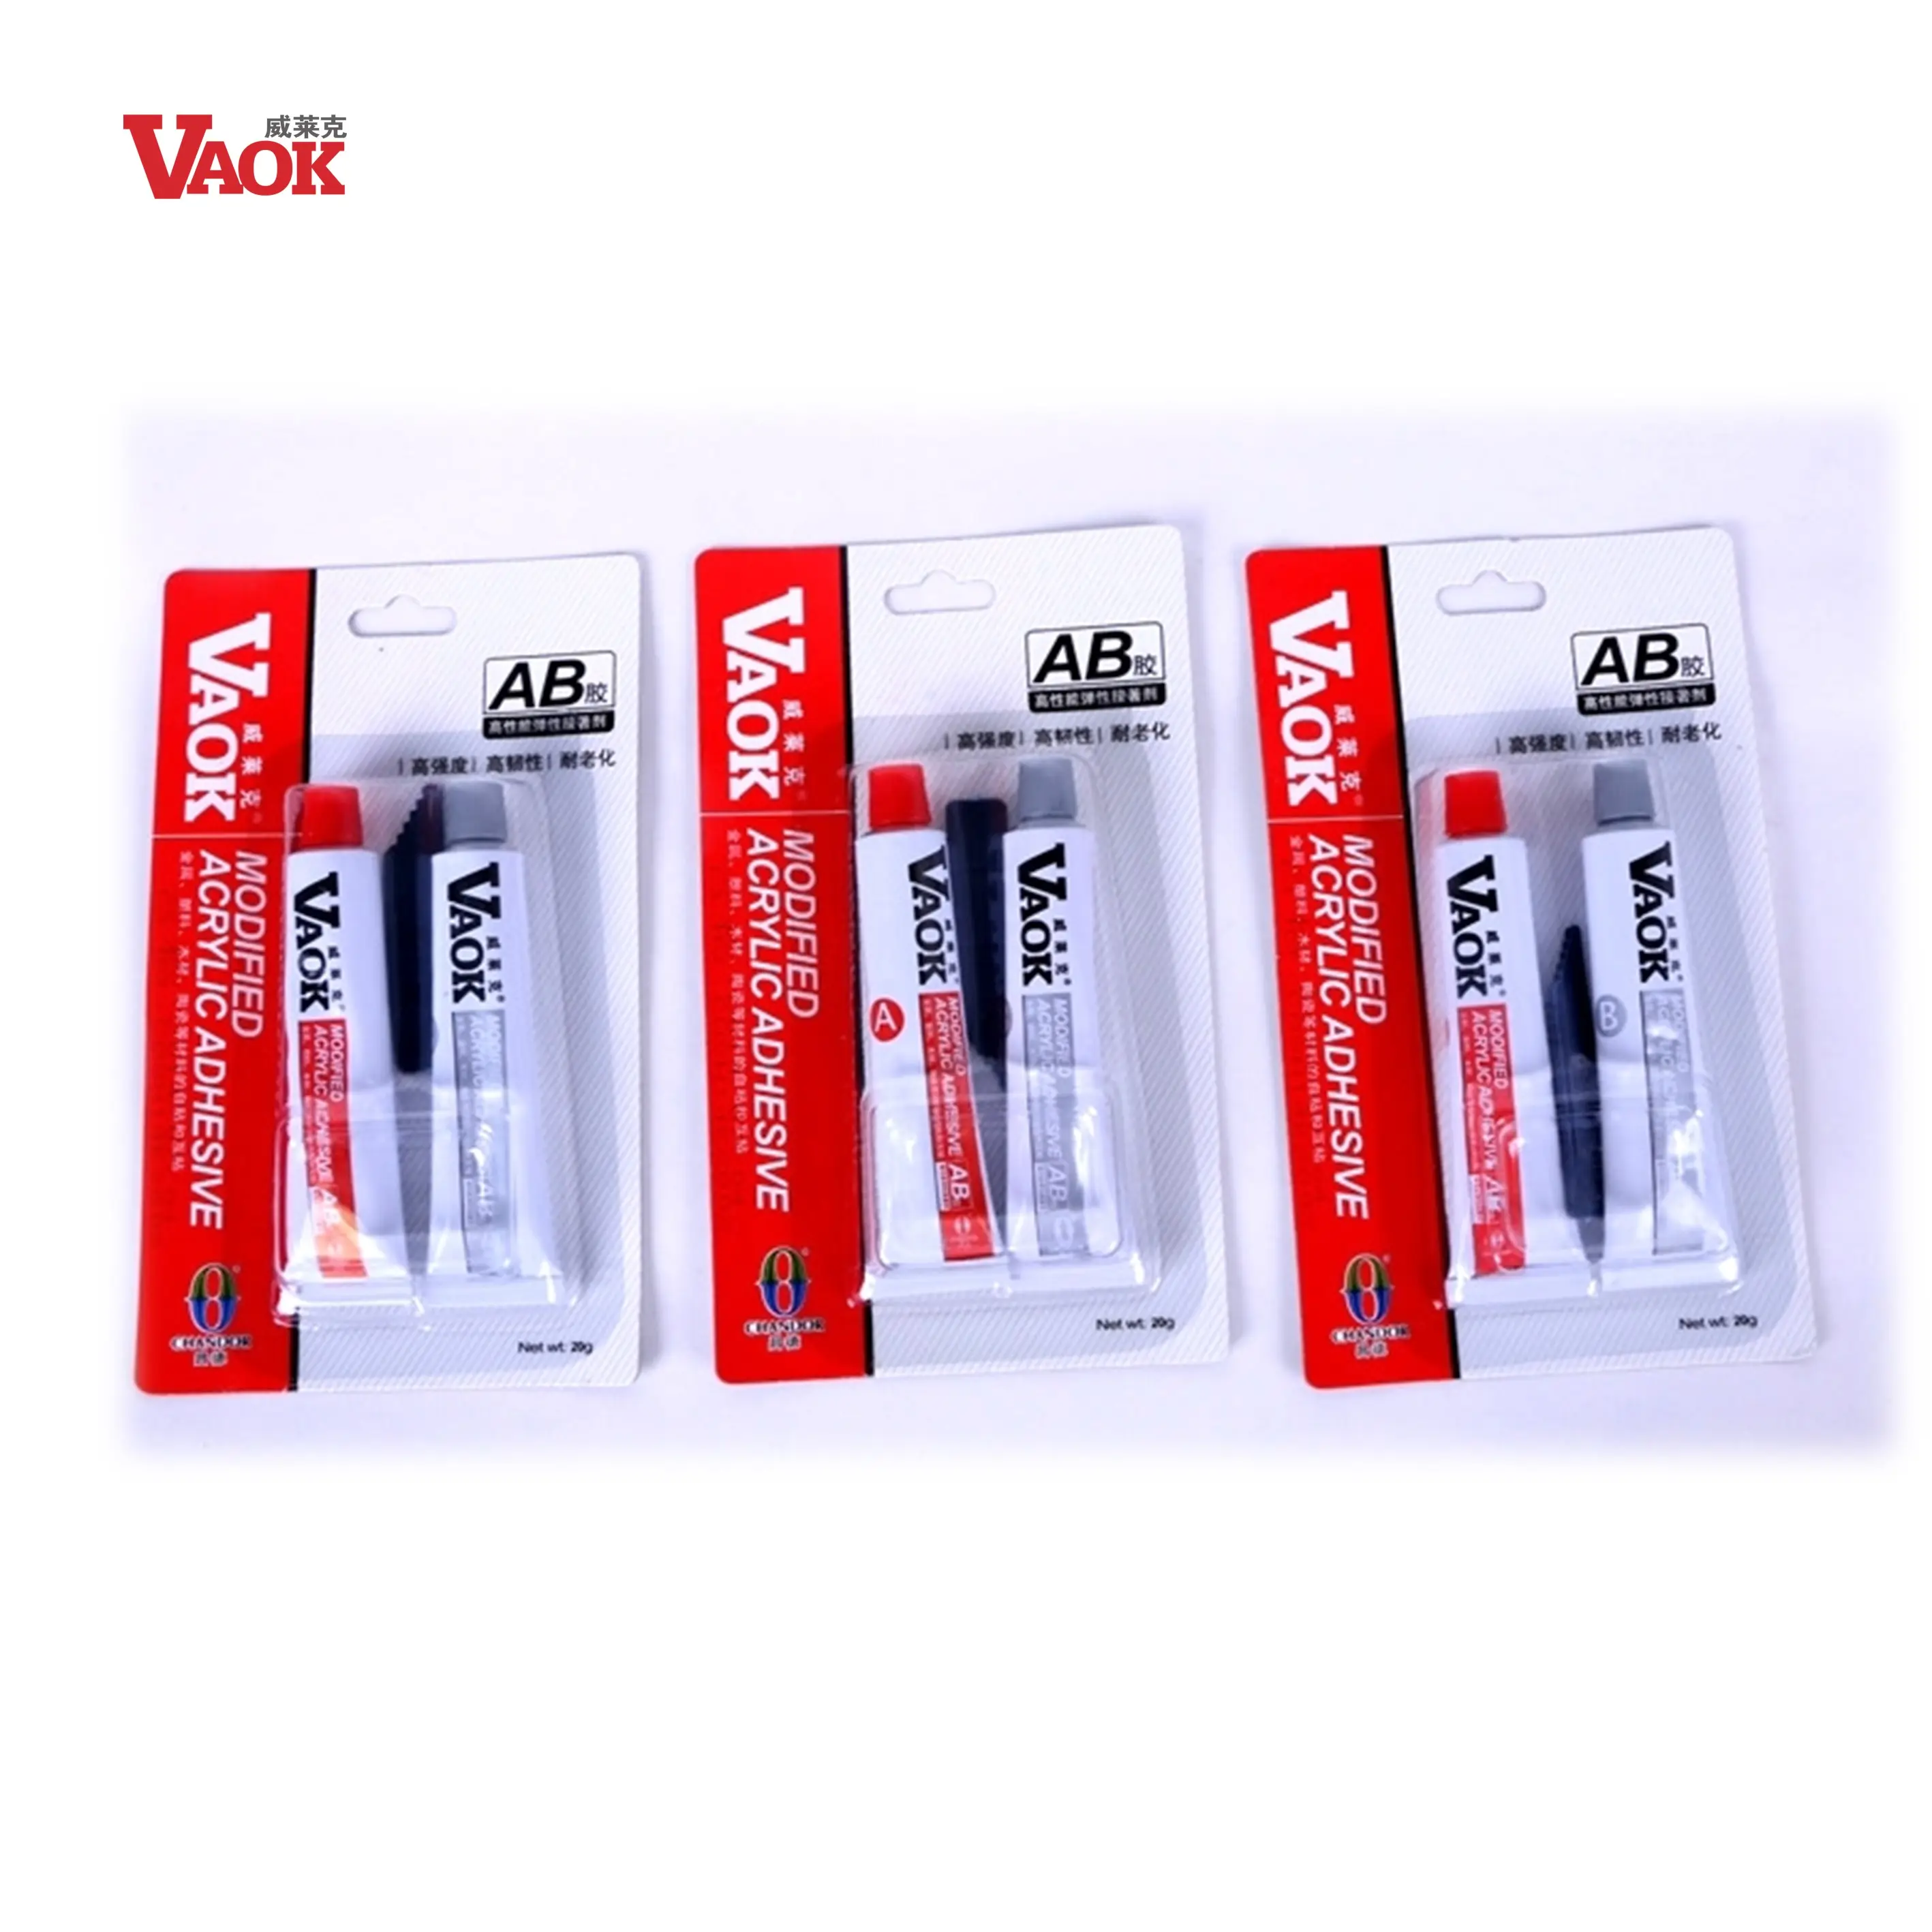 Wholesale VAOK 5 min fast cure 20g Acrylic AB glue modified acrylic adhesive for metal plastic wood ceramics